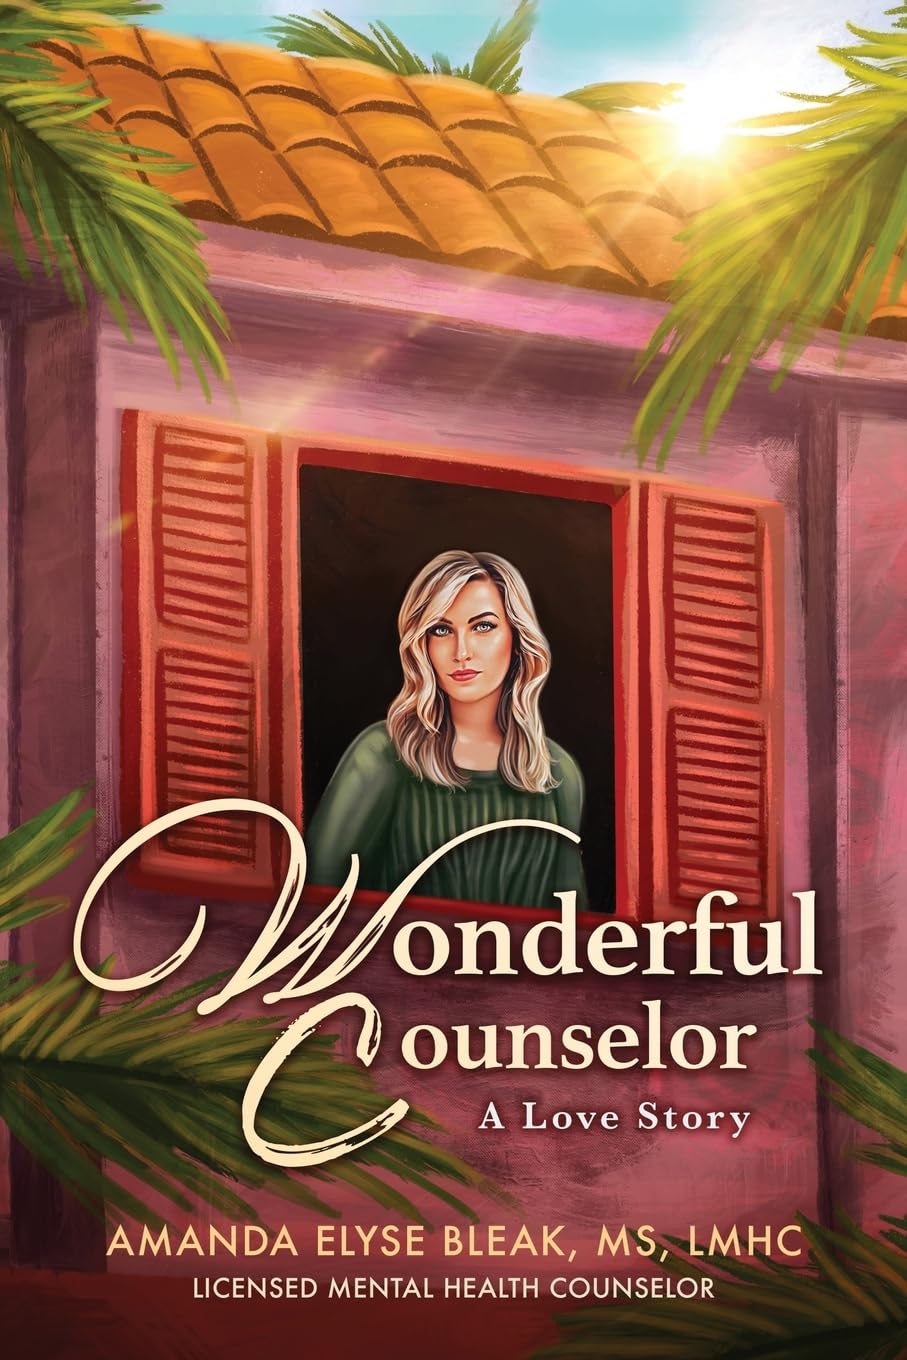 New novel "Wonderful Counselor" by Amanda Elyse Bleak, MS, LMHC is released, an inspiring story of a professional therapist who must face past trauma to stop her path of self-destruction